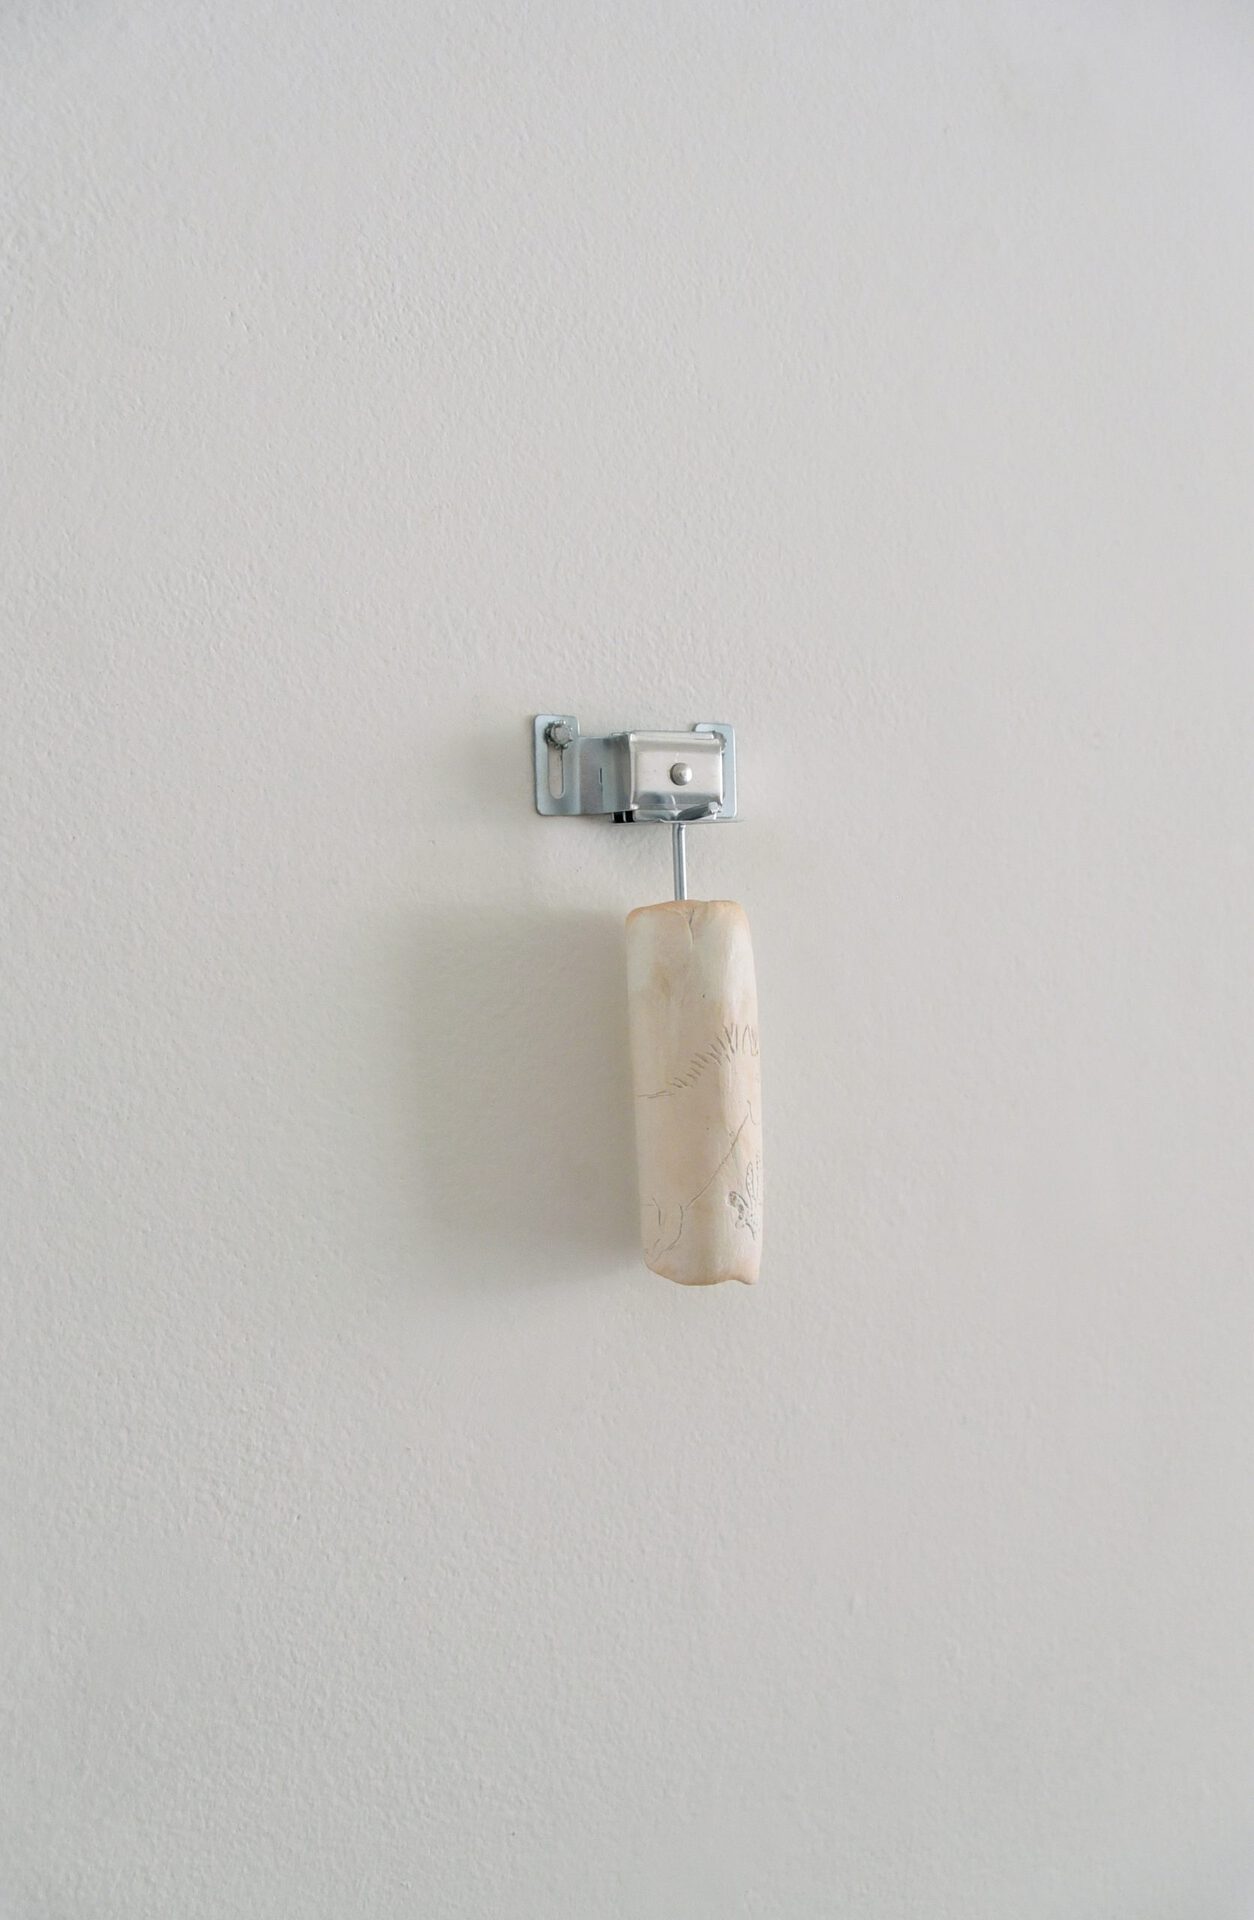 Brea Campbell-Stewart, Untitled ii (installation view), 2021, Clay and hardware, 1.5” x 6” x 1.5”.